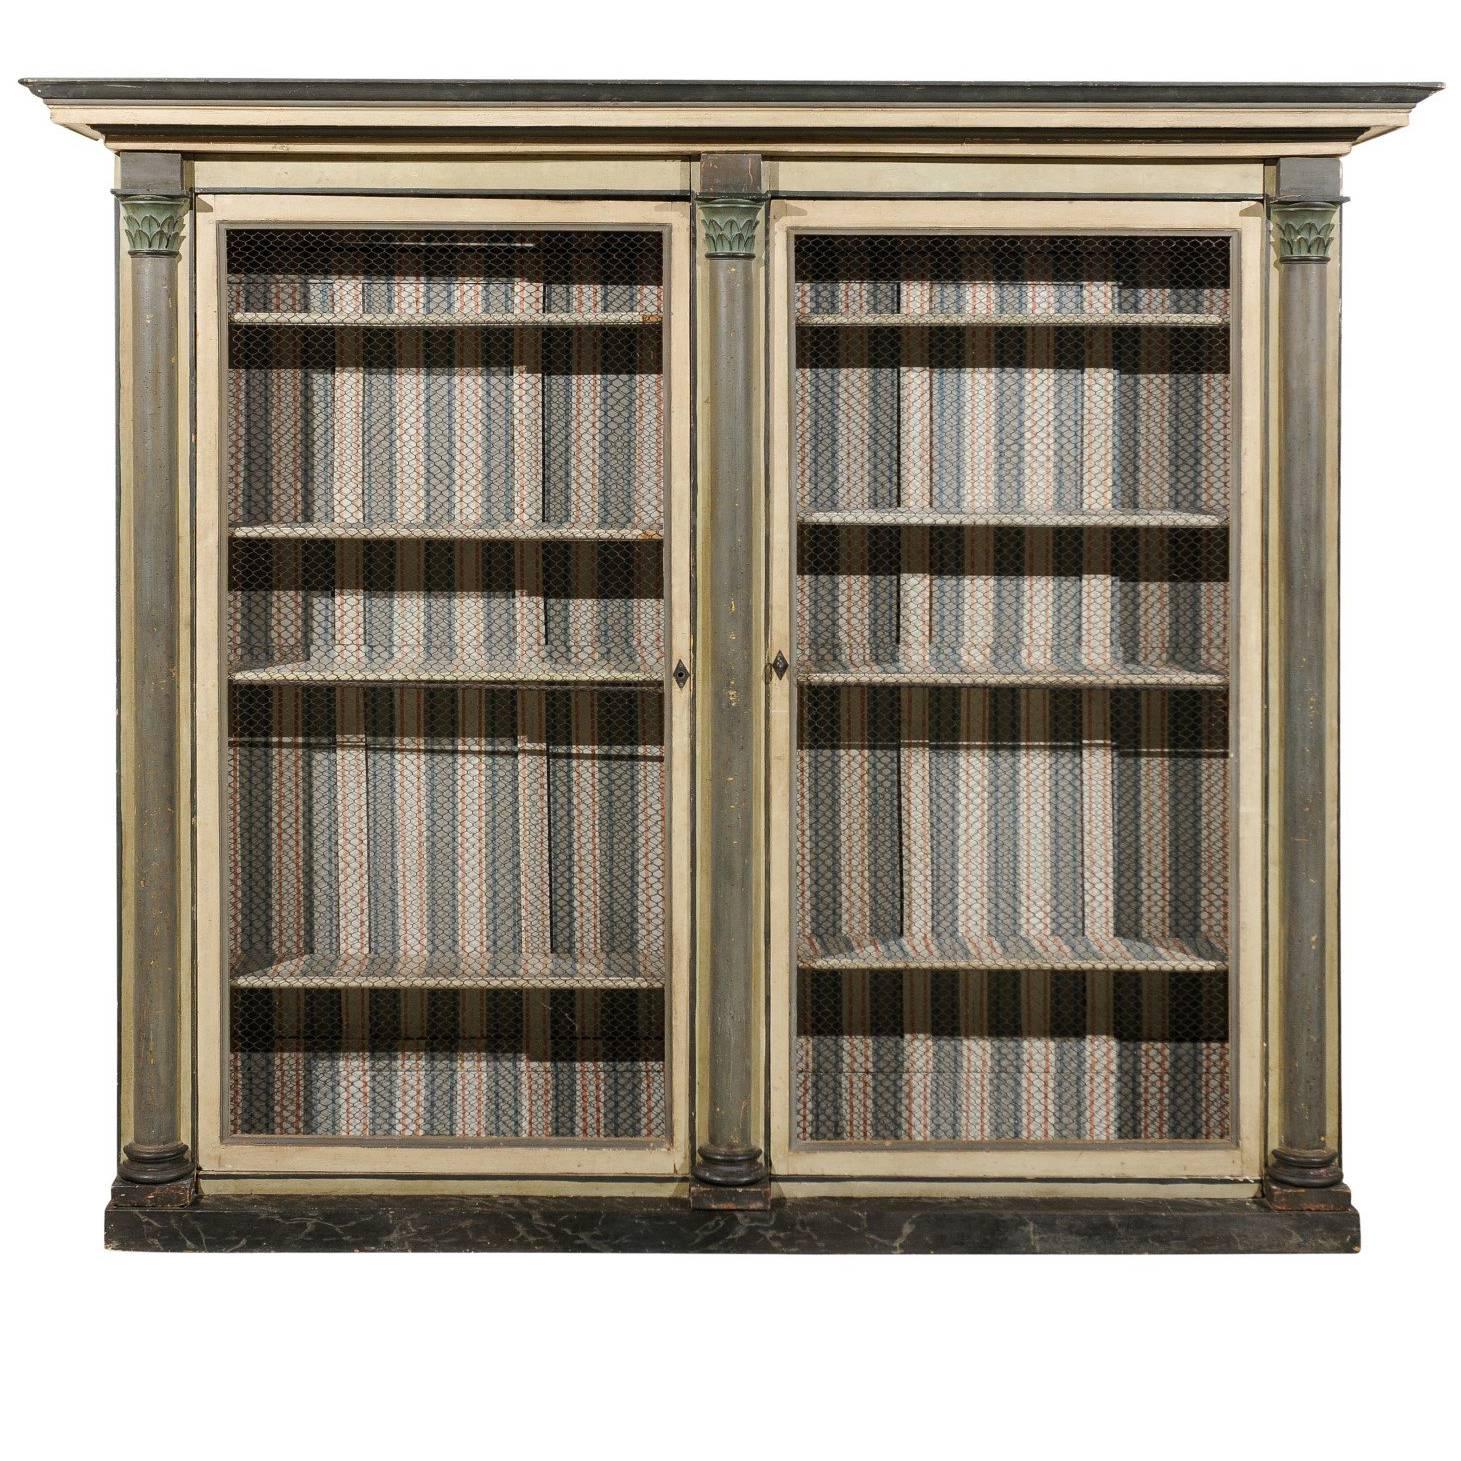 Neoclassical Style French Bookcase with Columns, circa 1880